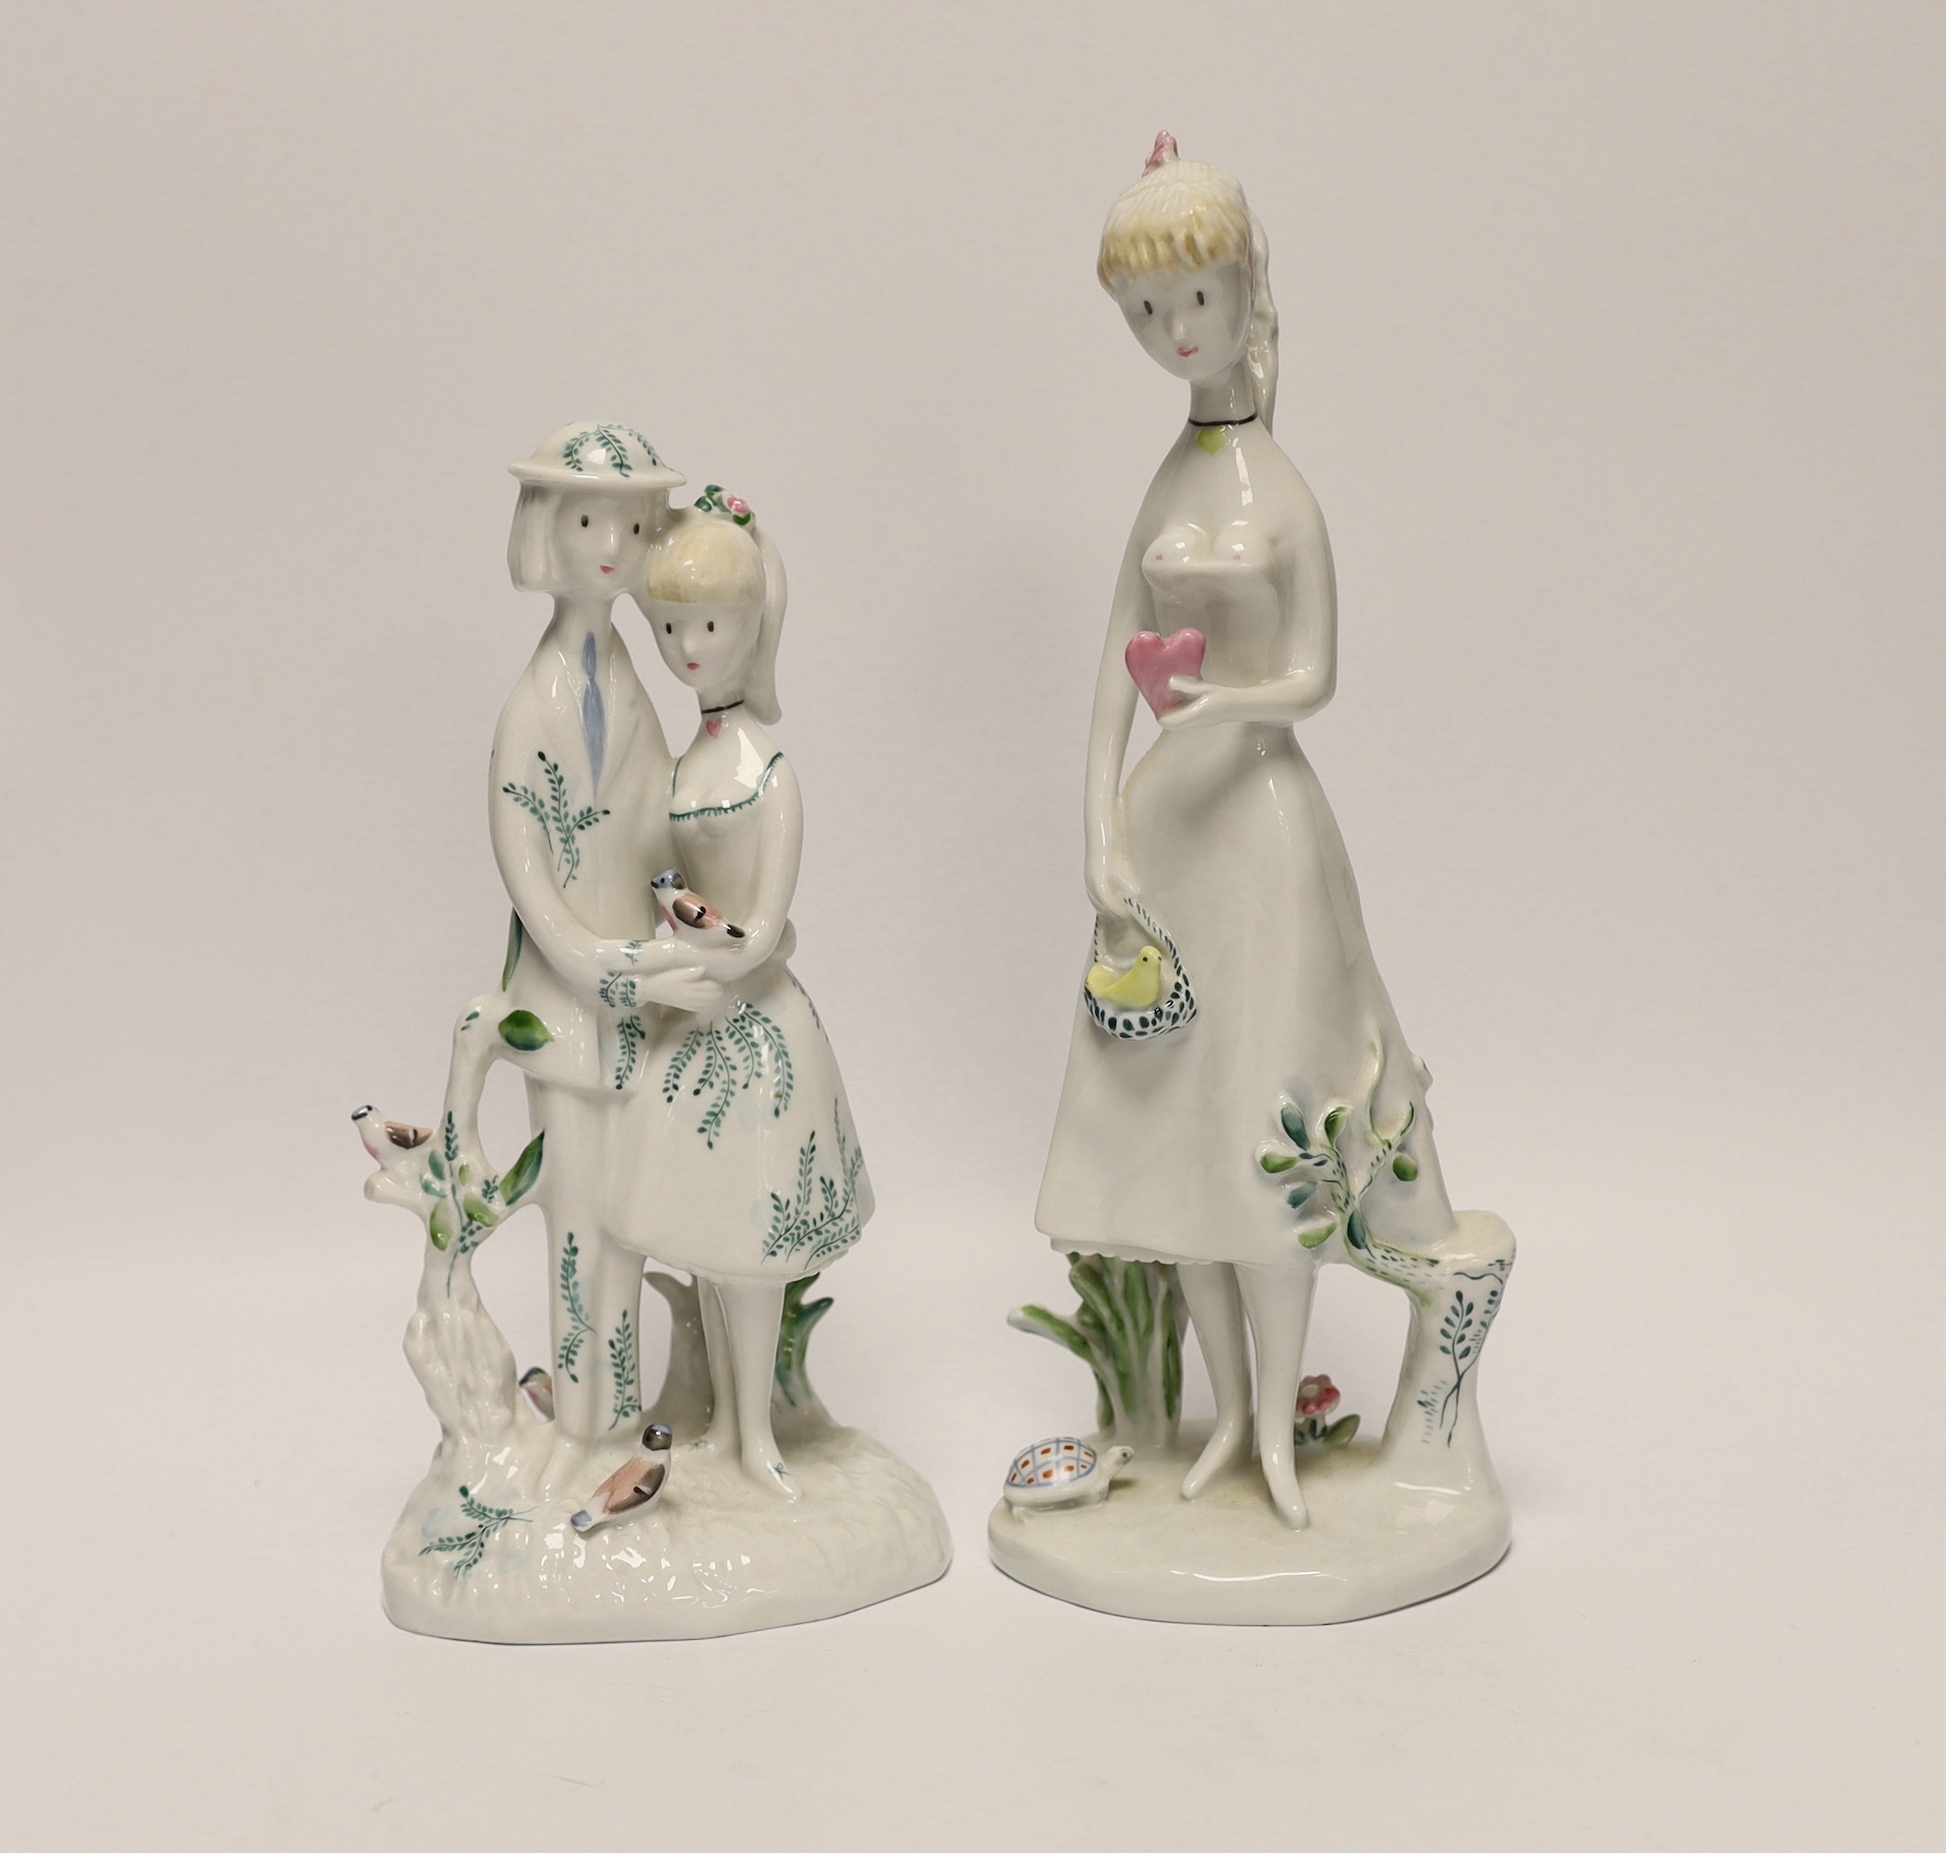 Two Rosenthal figures, a girl holding a heart and a figure group with a bird, tallest 26.5cm